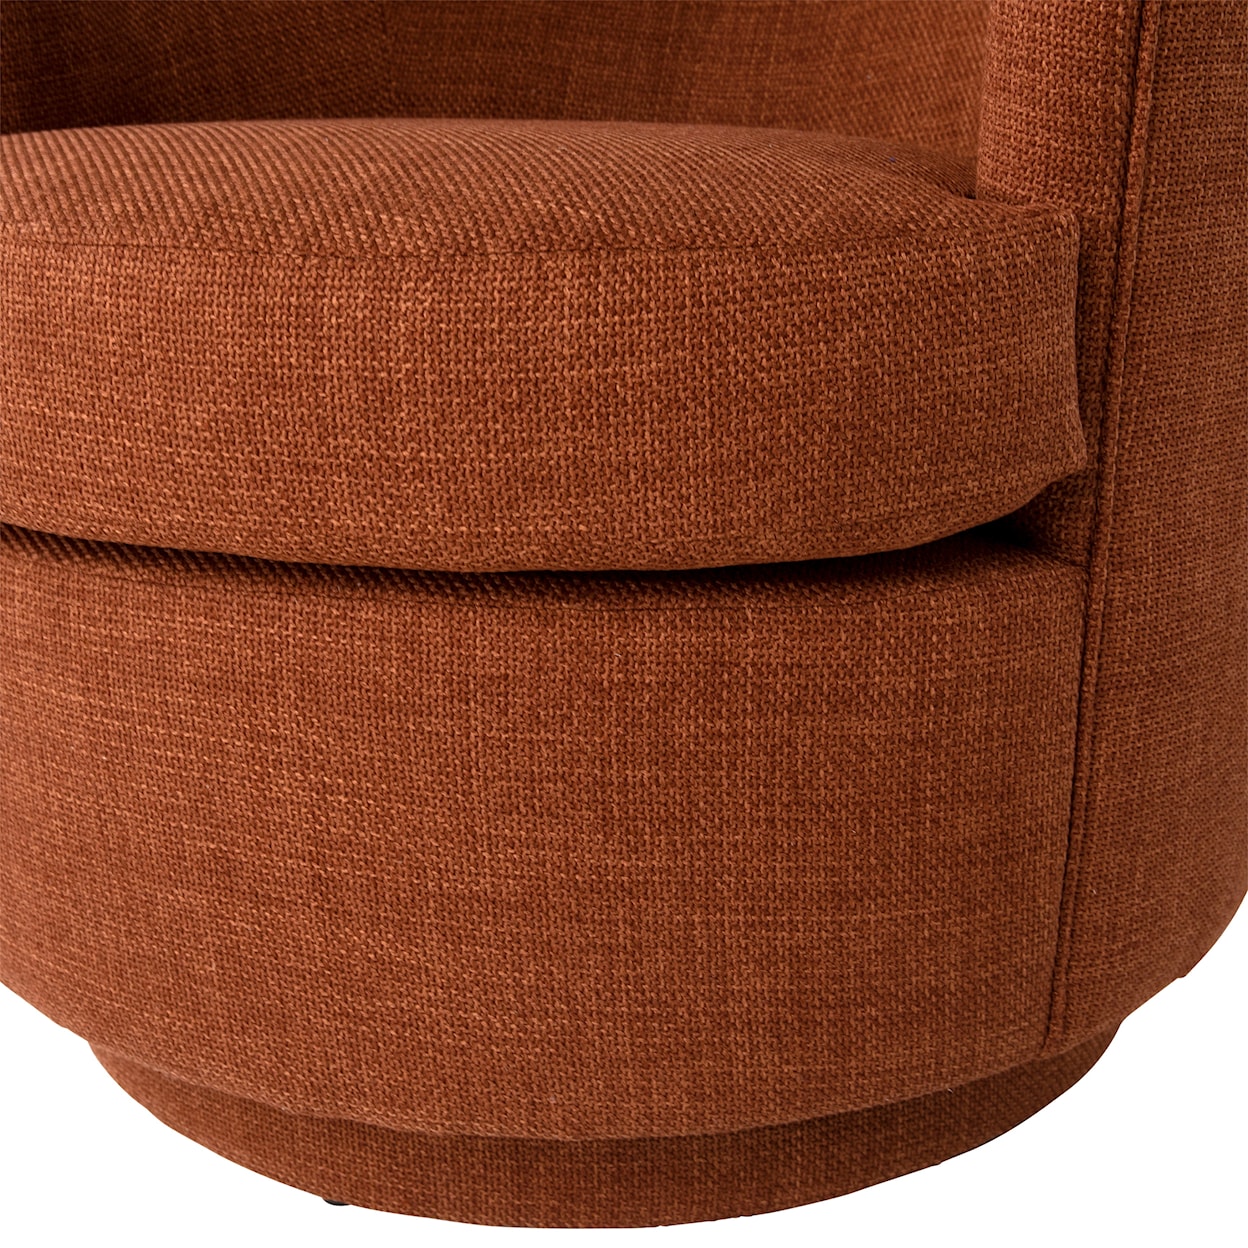 Dovetail Furniture Occasional Chairs Swivel Chair